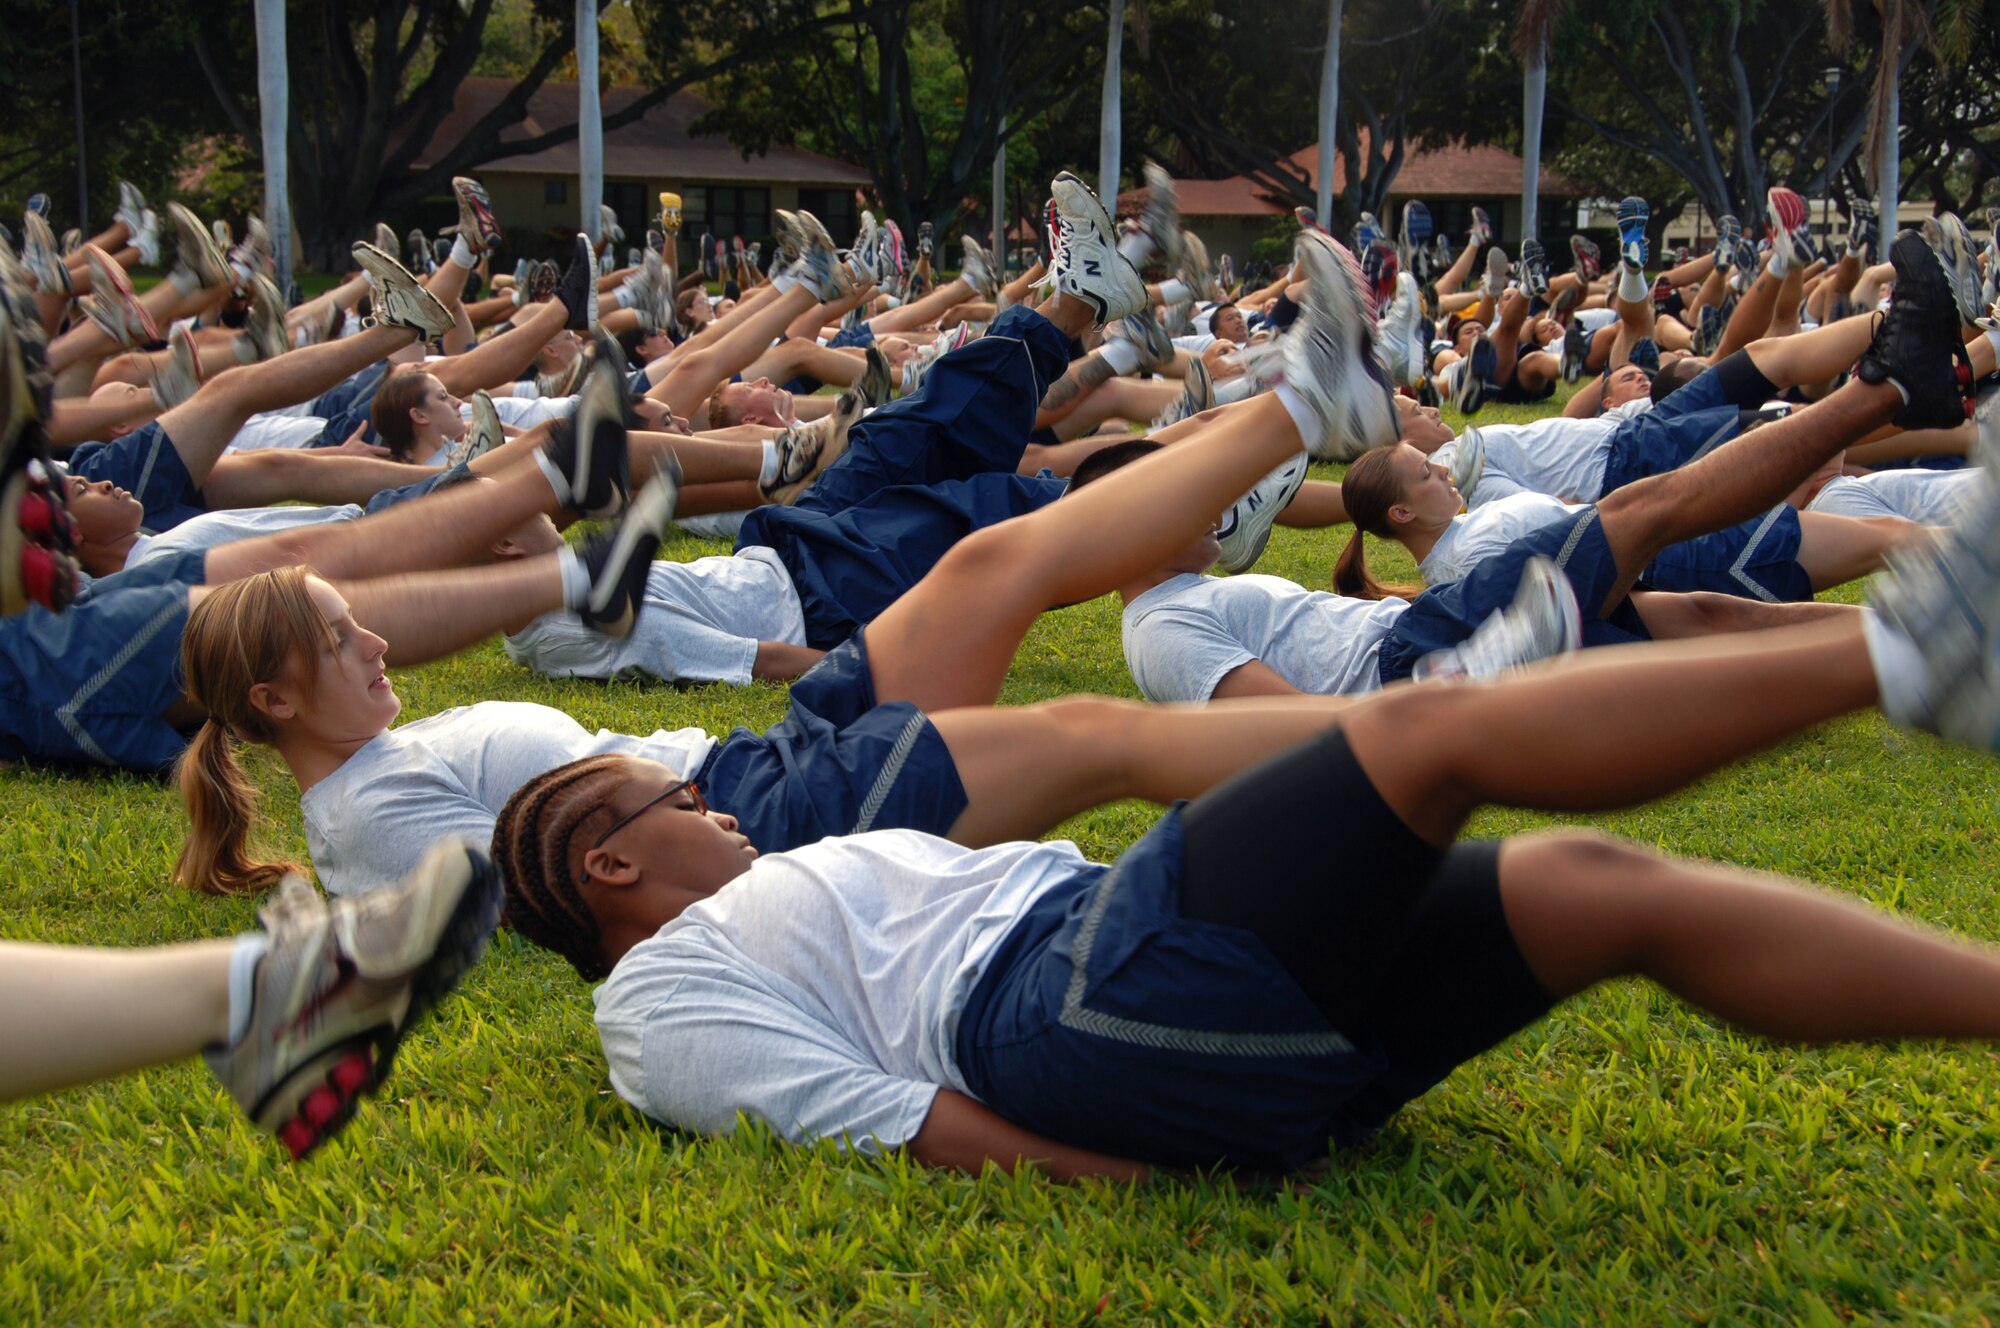 Airmen perform flutter kicks as a warm up exercise for the "Warrior Run" May 7 at Joint Base Pearl Harbor Hickam, Hi. Participants were addressed by Col. Giovanni Tuck, 15th Airlift Wing Commander before beginning the run - Col. Tuck's last as 15th AW commander. (U.S. Air Force photo by Senior Airman Nathan Allen)